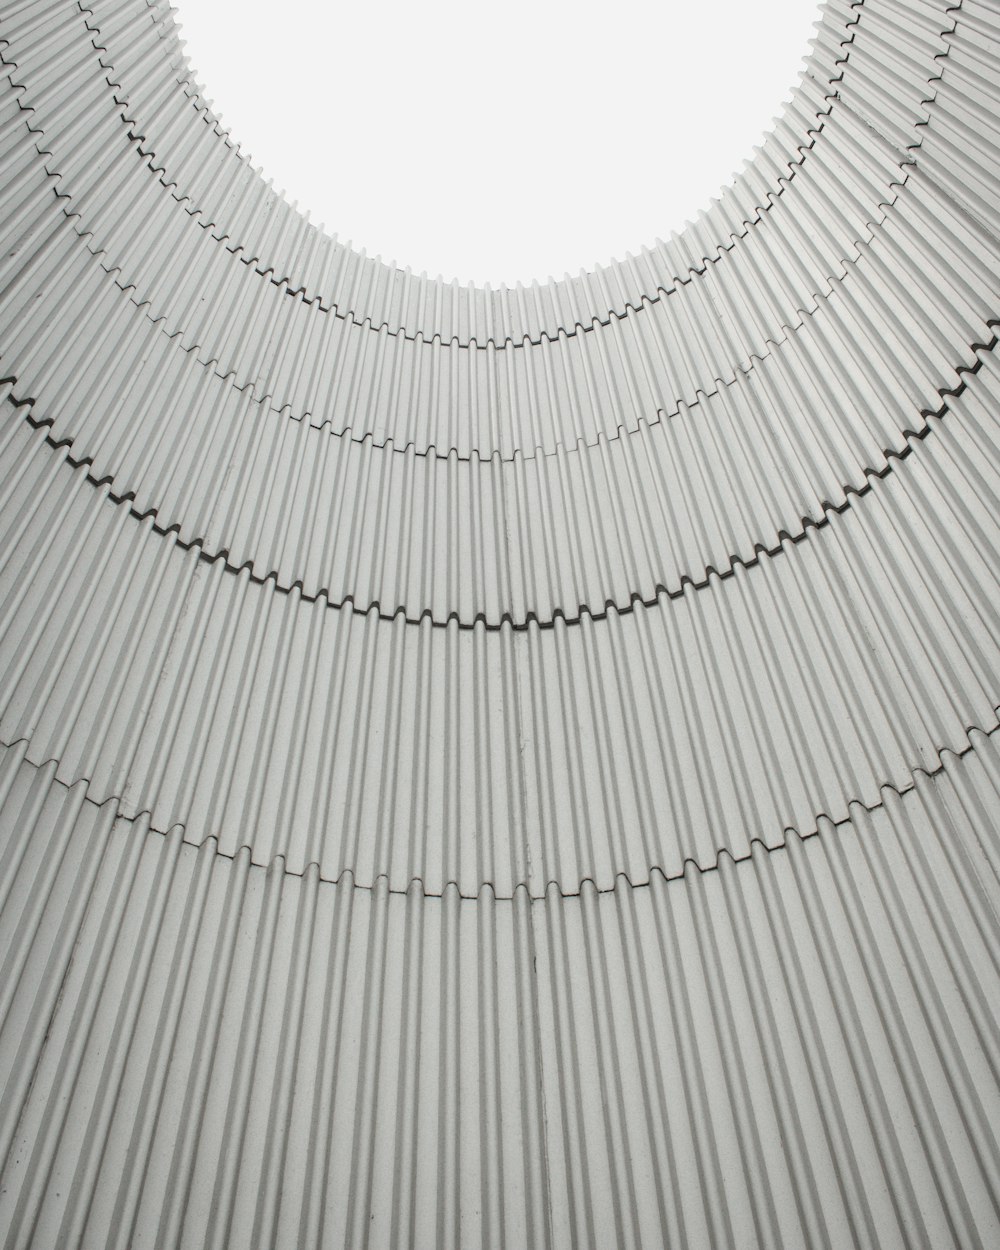 a circular metal structure with a white sky in the background